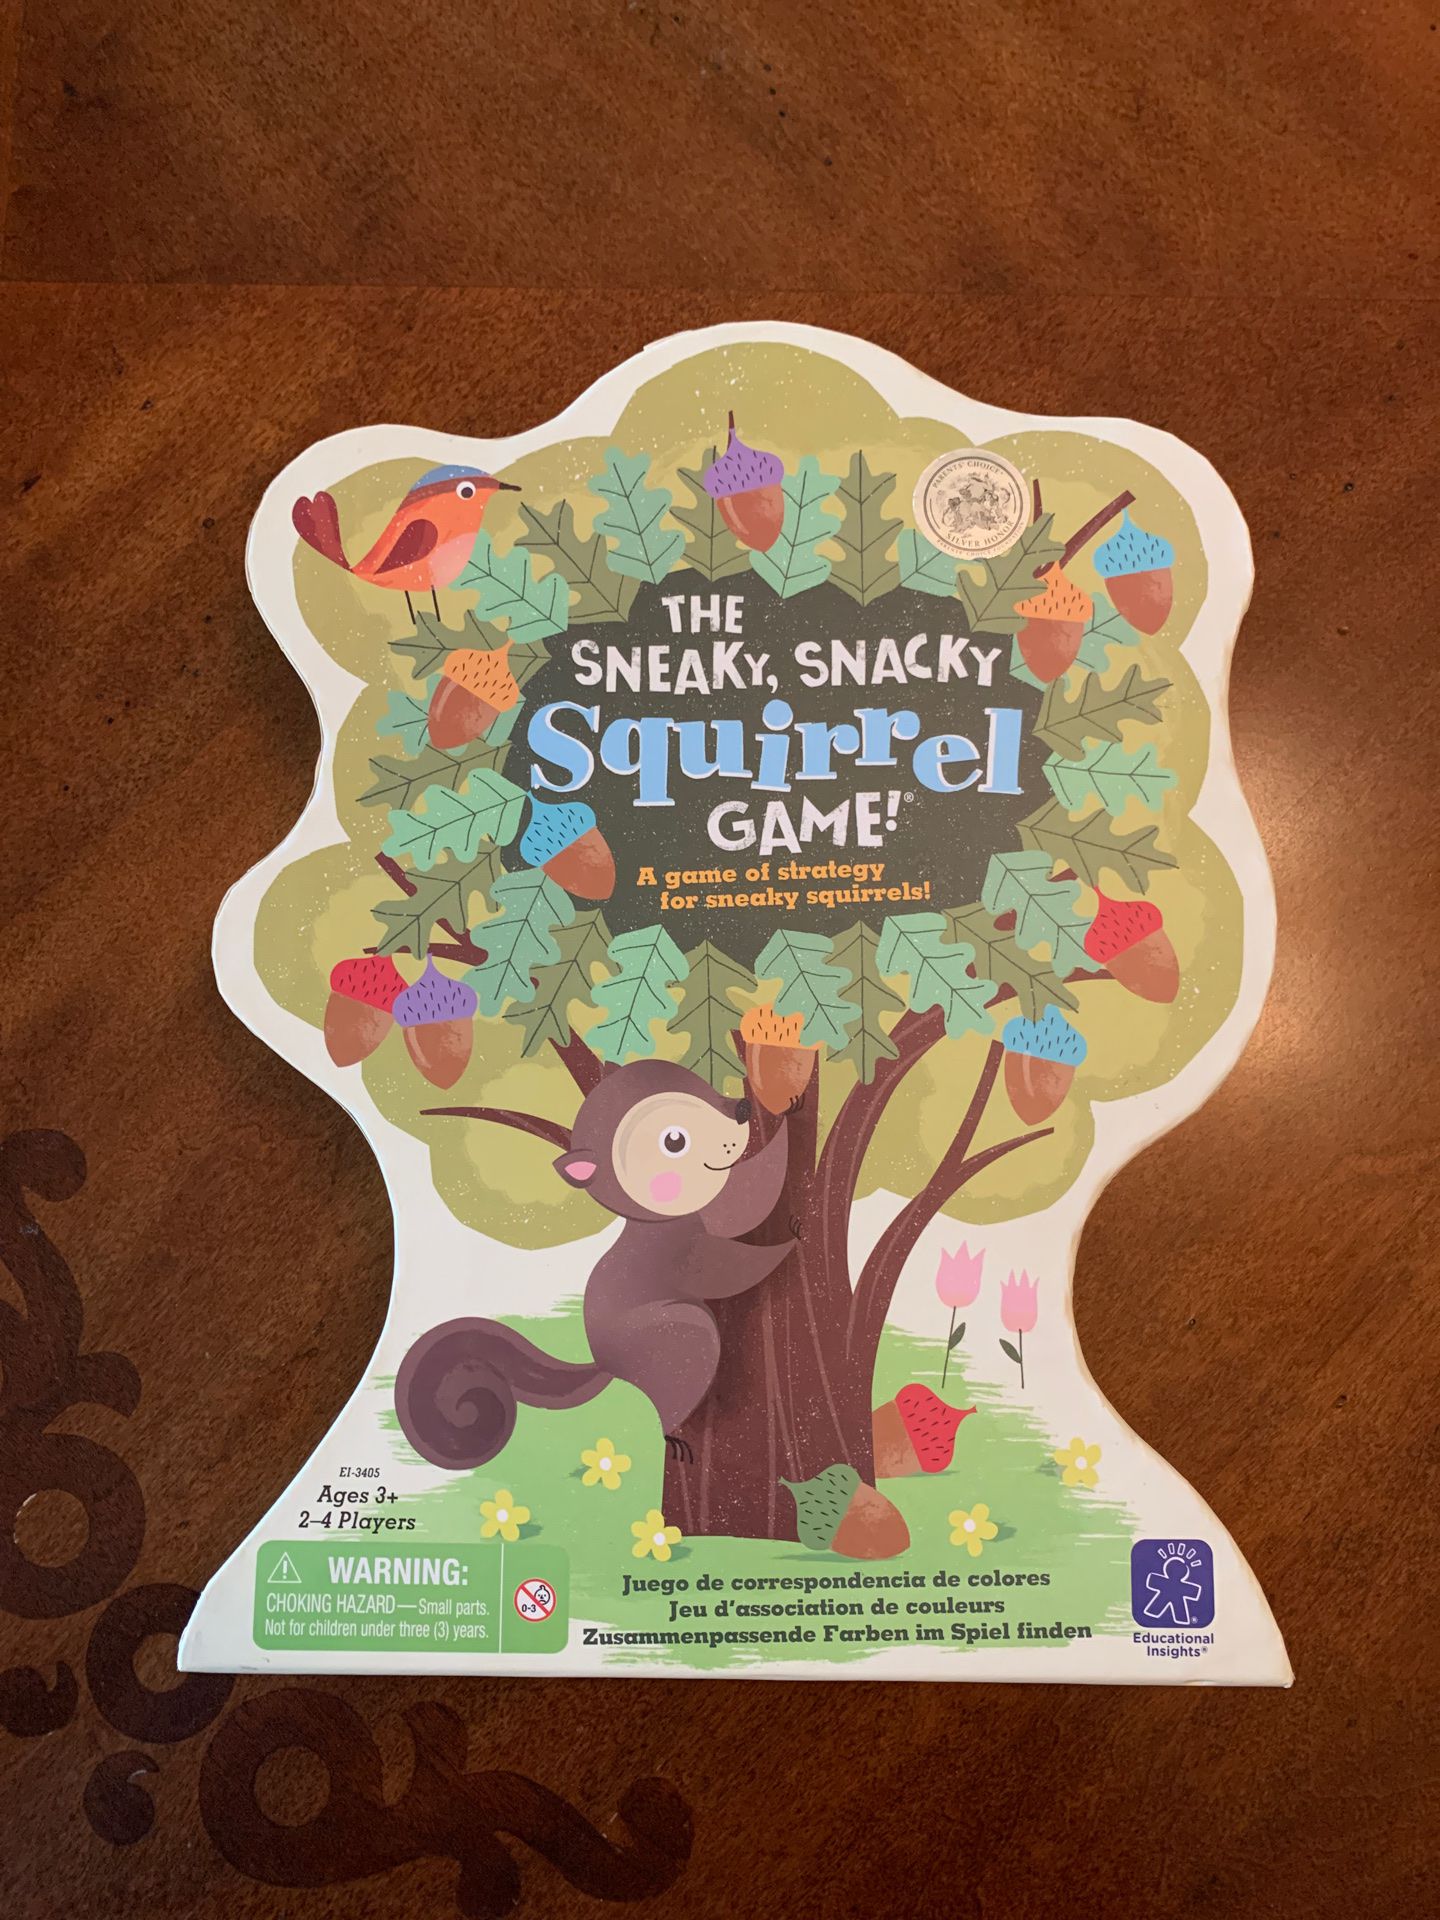 The Sneaky, Snacky Squirrel Family Friendly Game